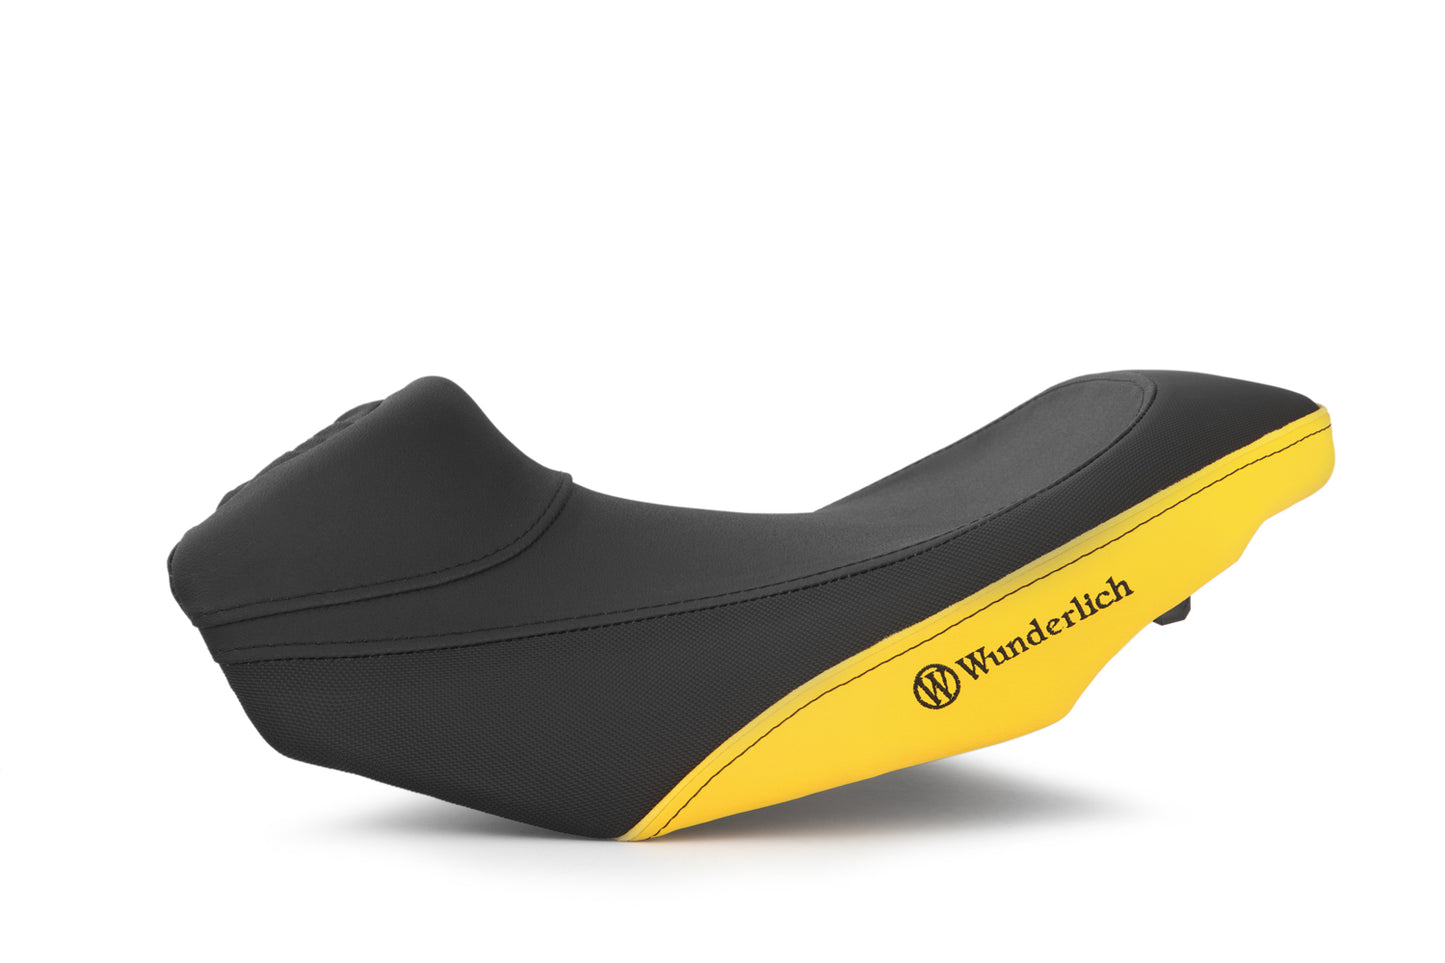 Wunderlich »AKTIVKOMFORT« rider seat - low with seat heating Smart Plug & Play - yellow | Edition 40 Years GS